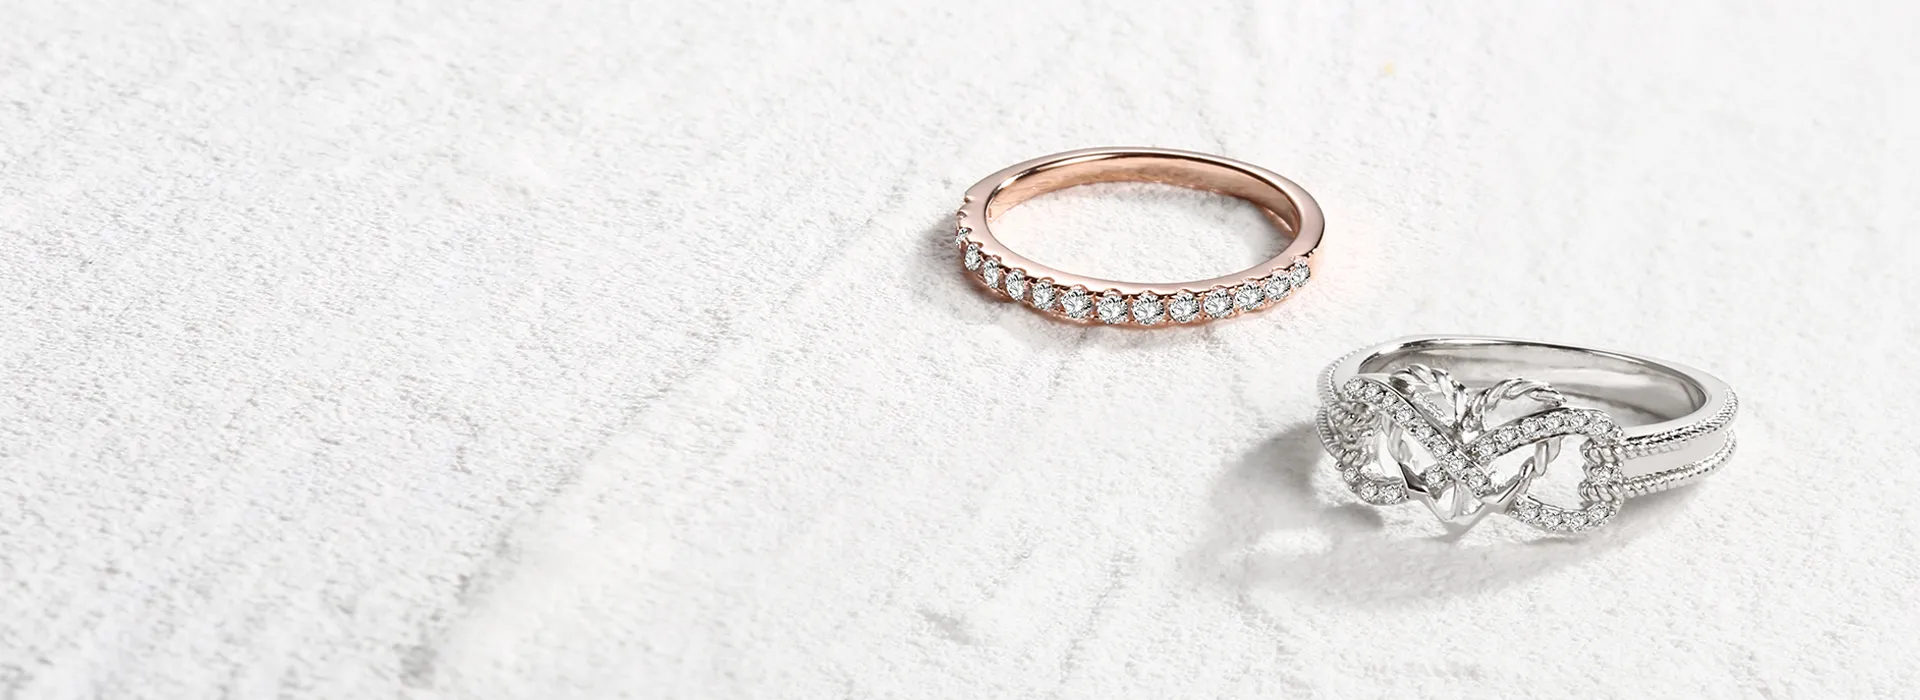 Heart Infinity Wedding Ring and Rose Gold Wedding Ring